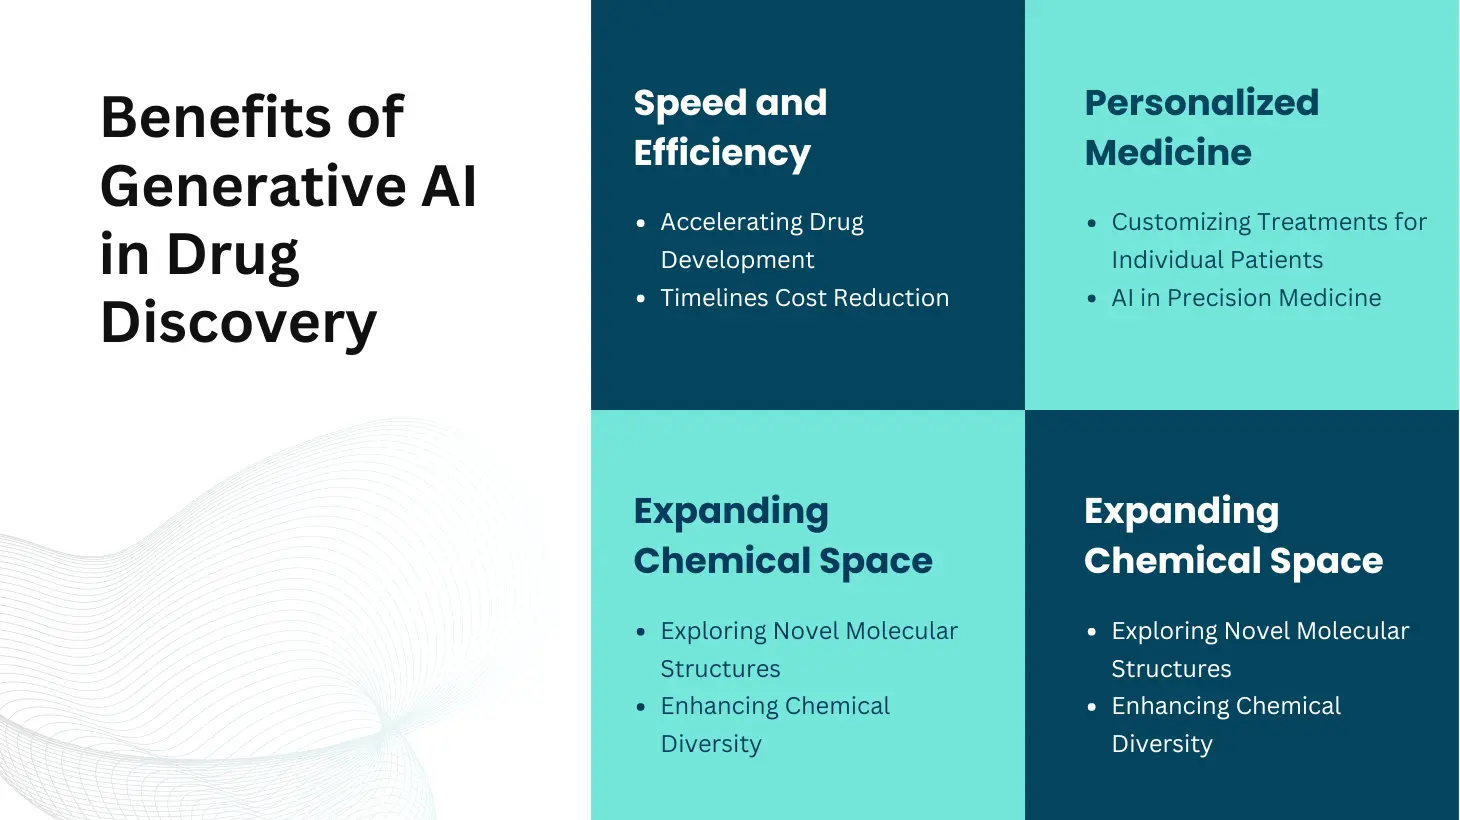 Benefits of generative AI in drug discovery.